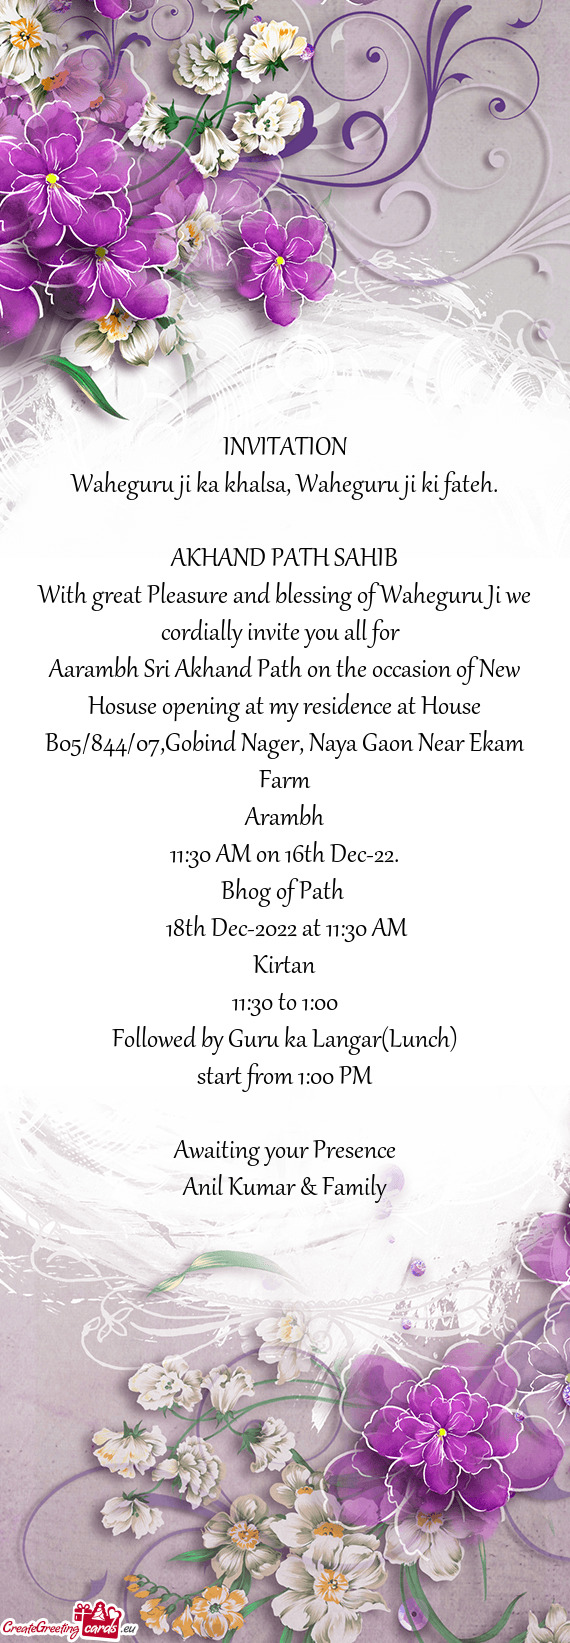 Aarambh Sri Akhand Path on the occasion of New Hosuse opening at my residence at House B05/844/07,Go